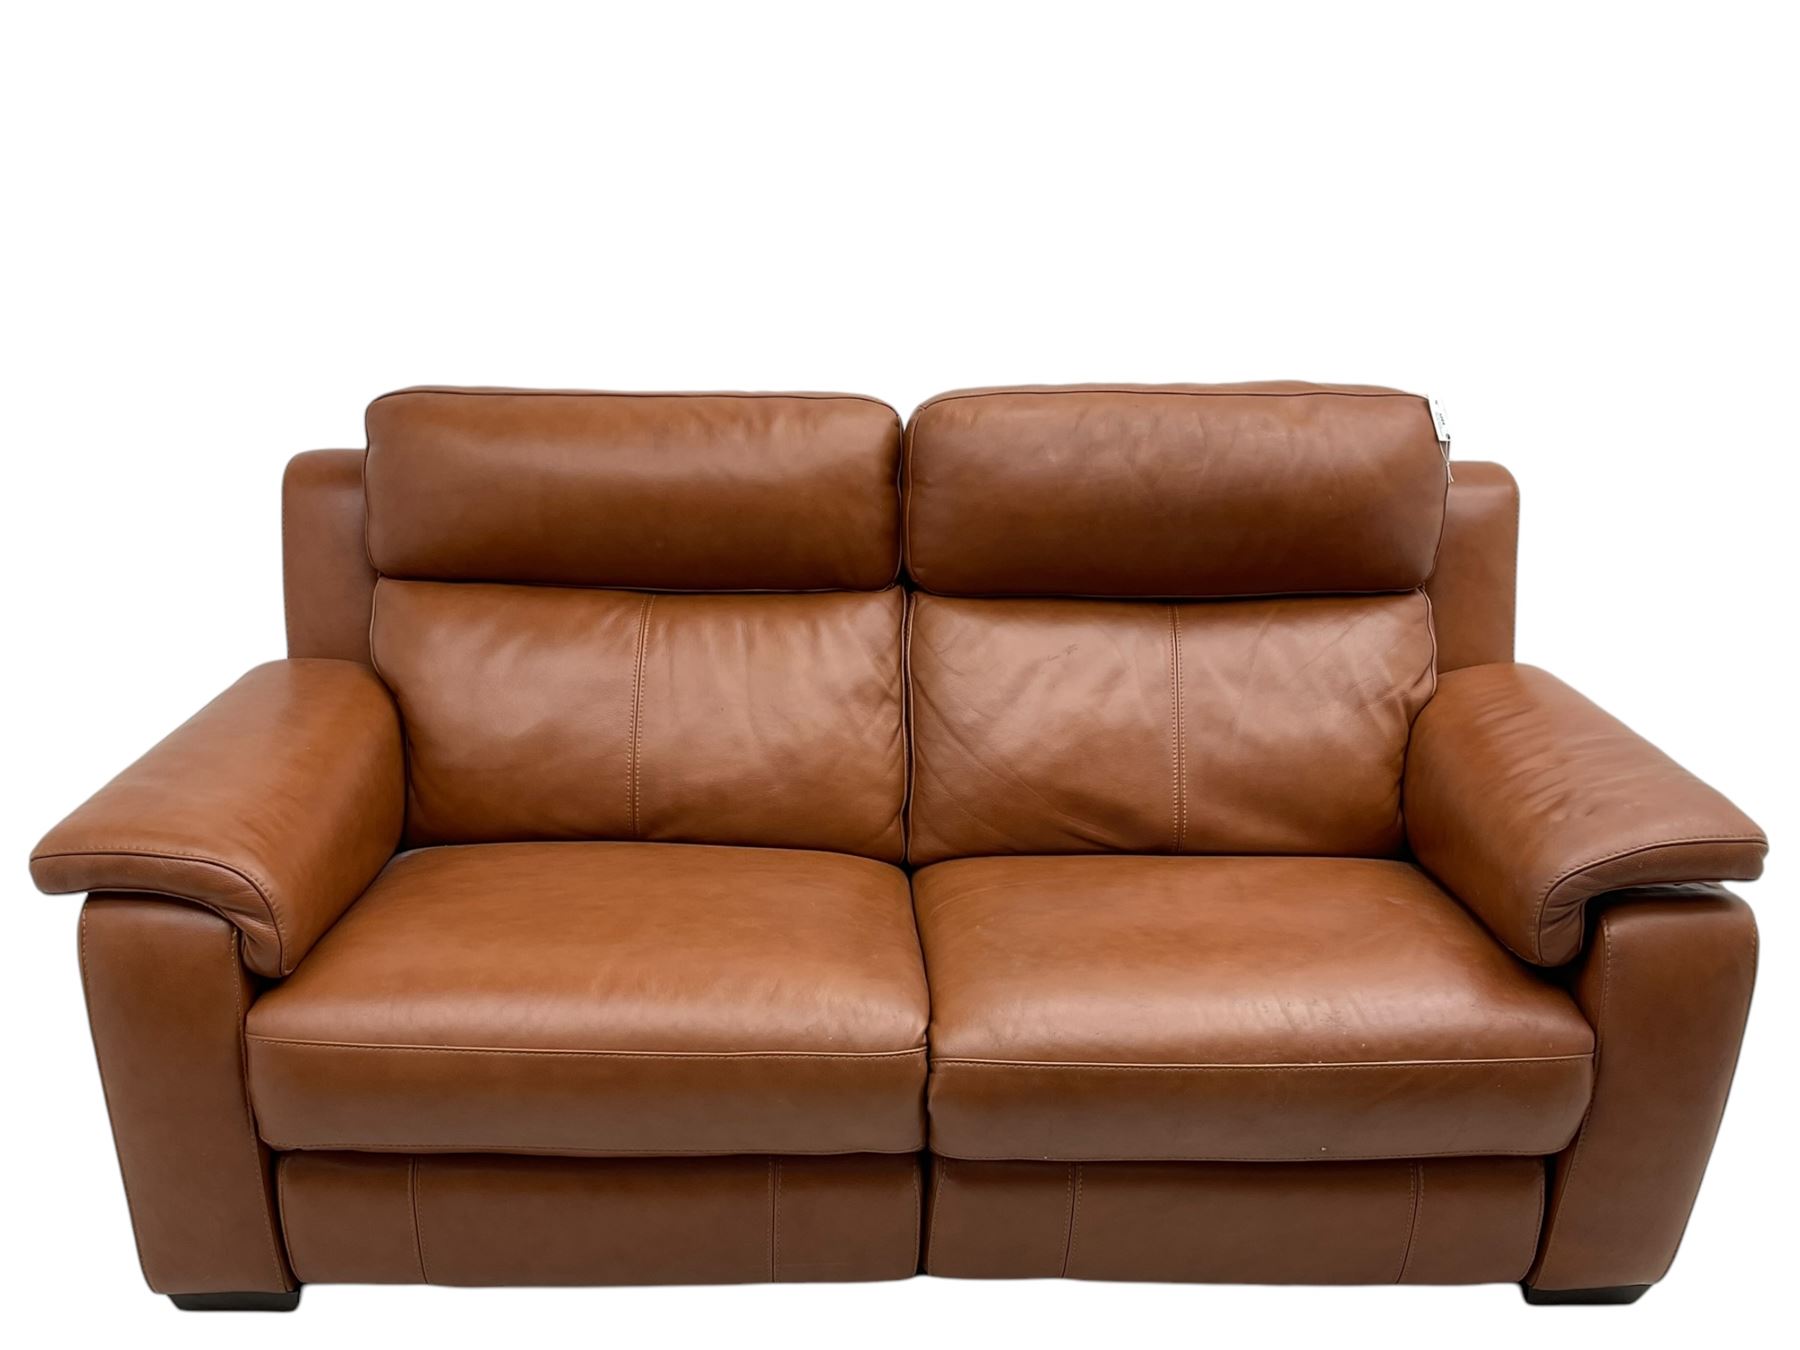 Two-seat electric reclining 'smart' sofa (W192cm - Image 6 of 8